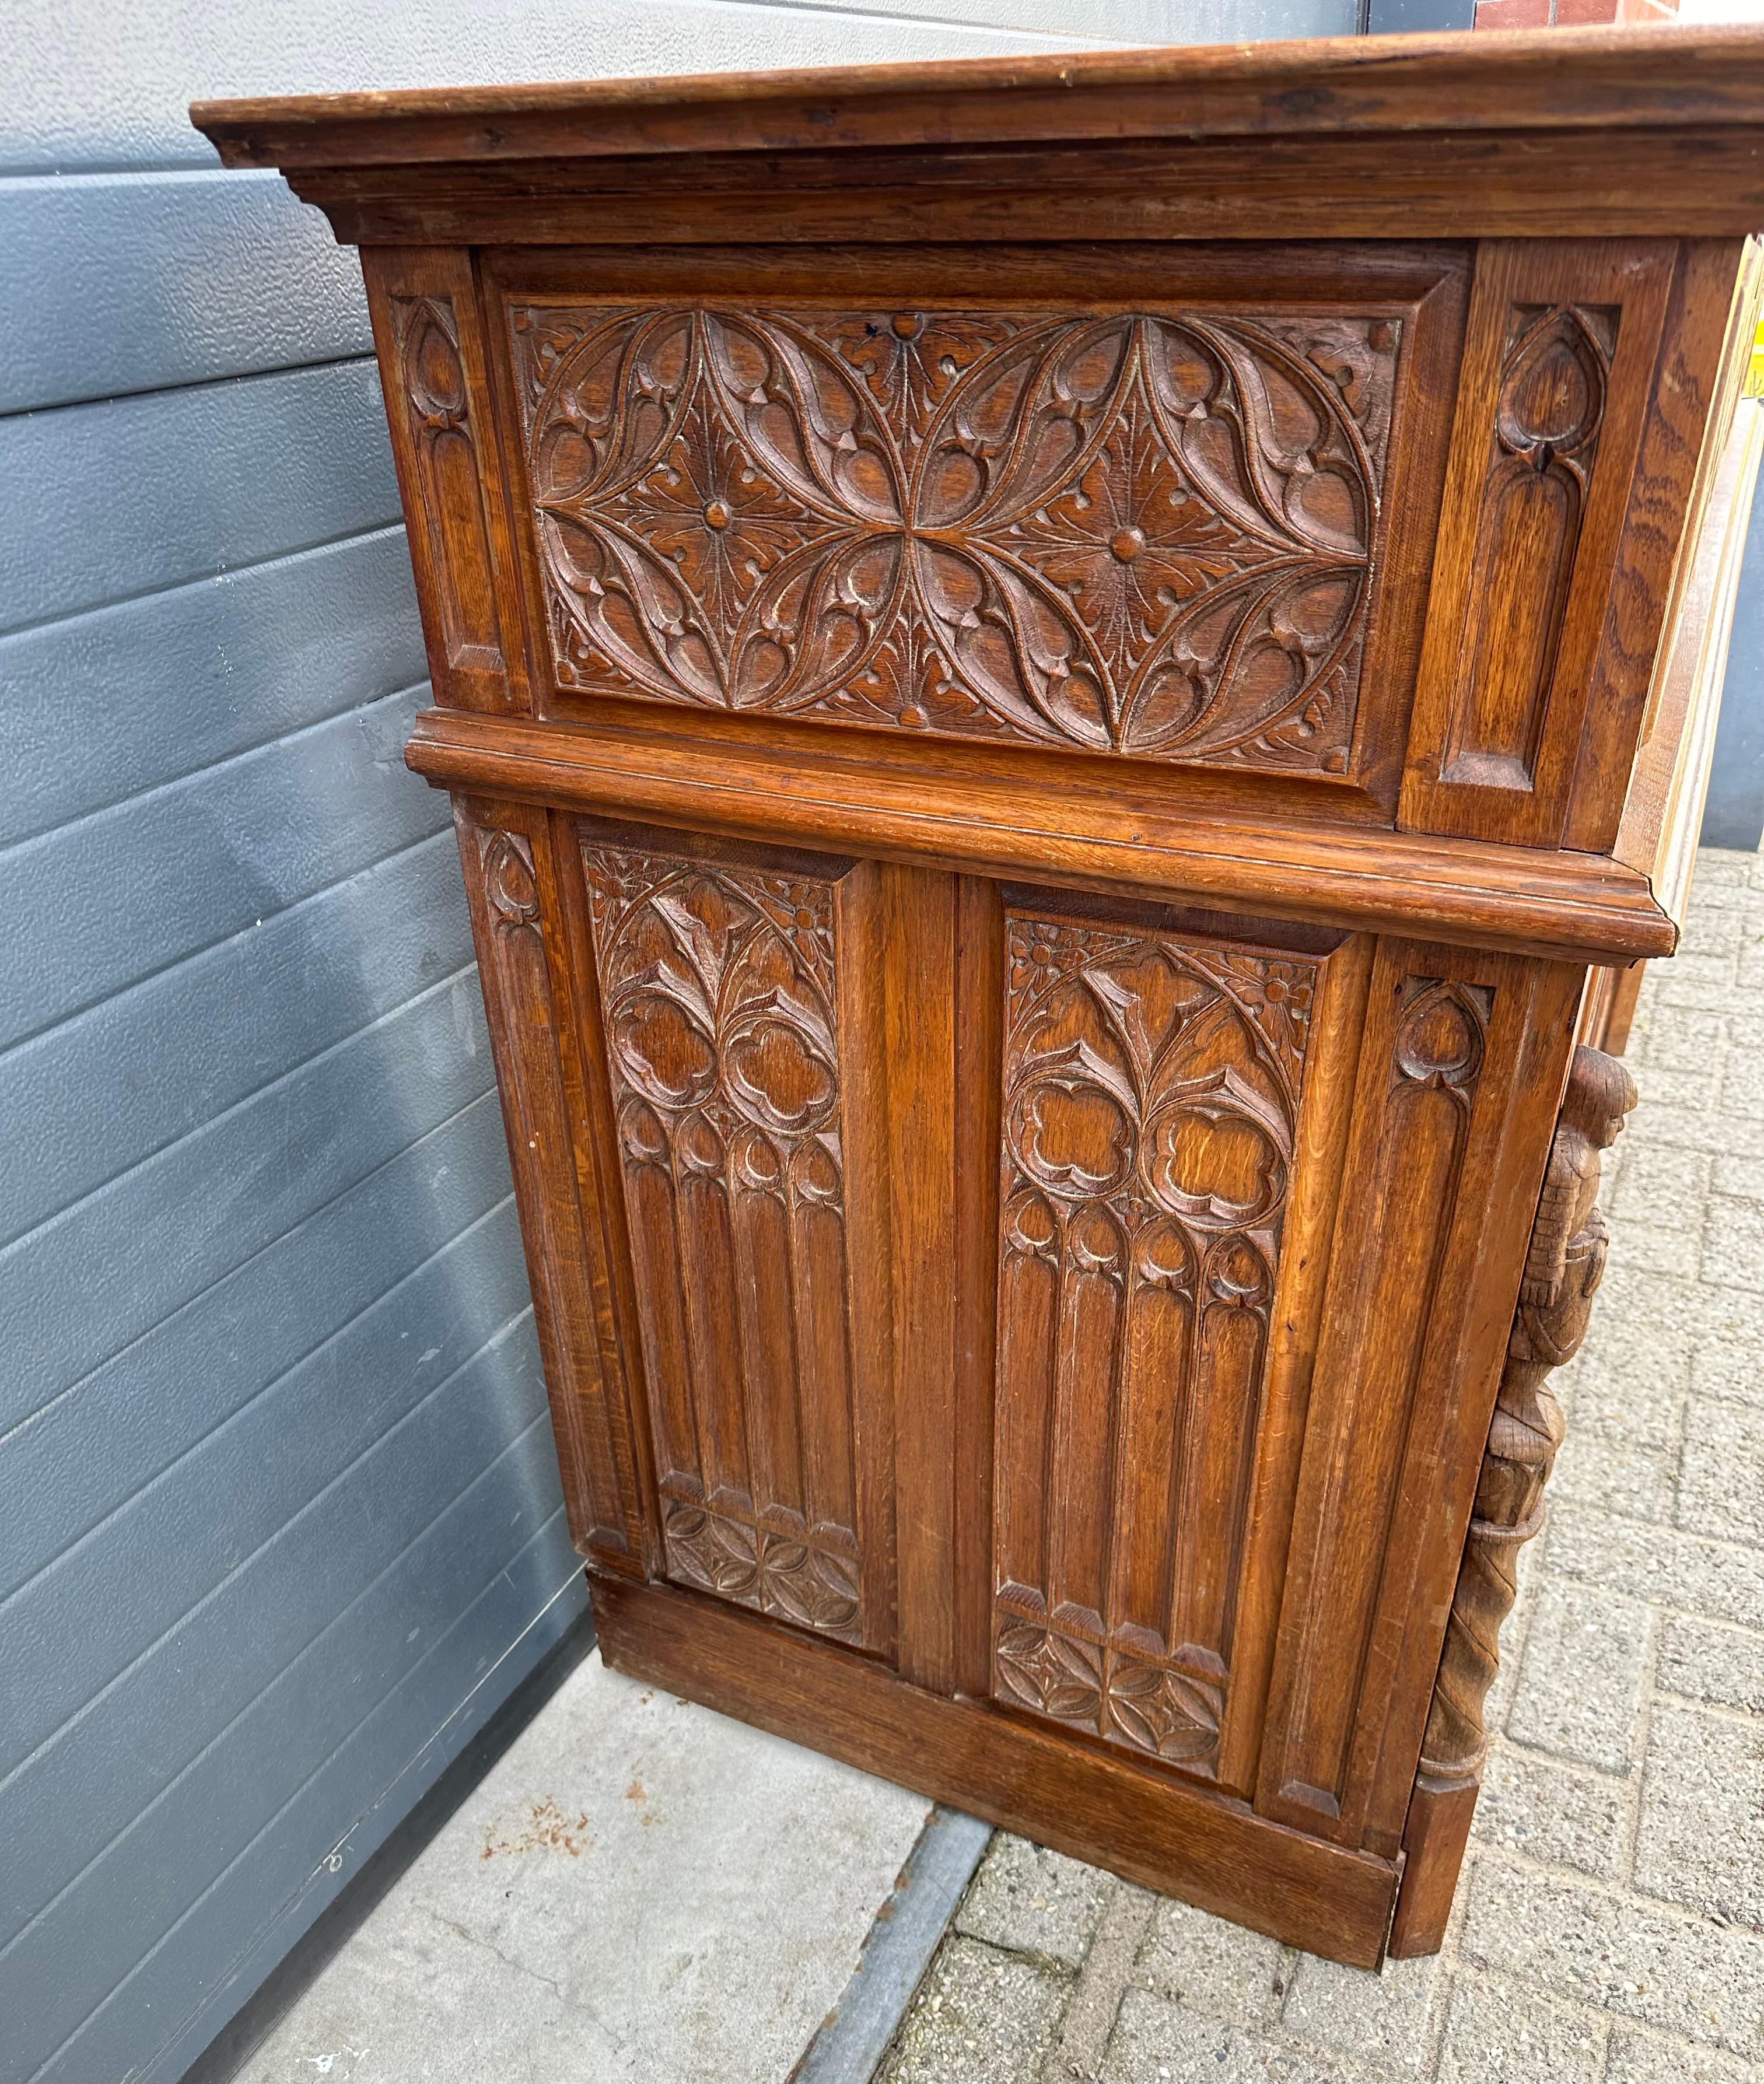 Gothic Revival Oak Fireplace Mantel with Carved Church Window Panels & Guards For Sale 1